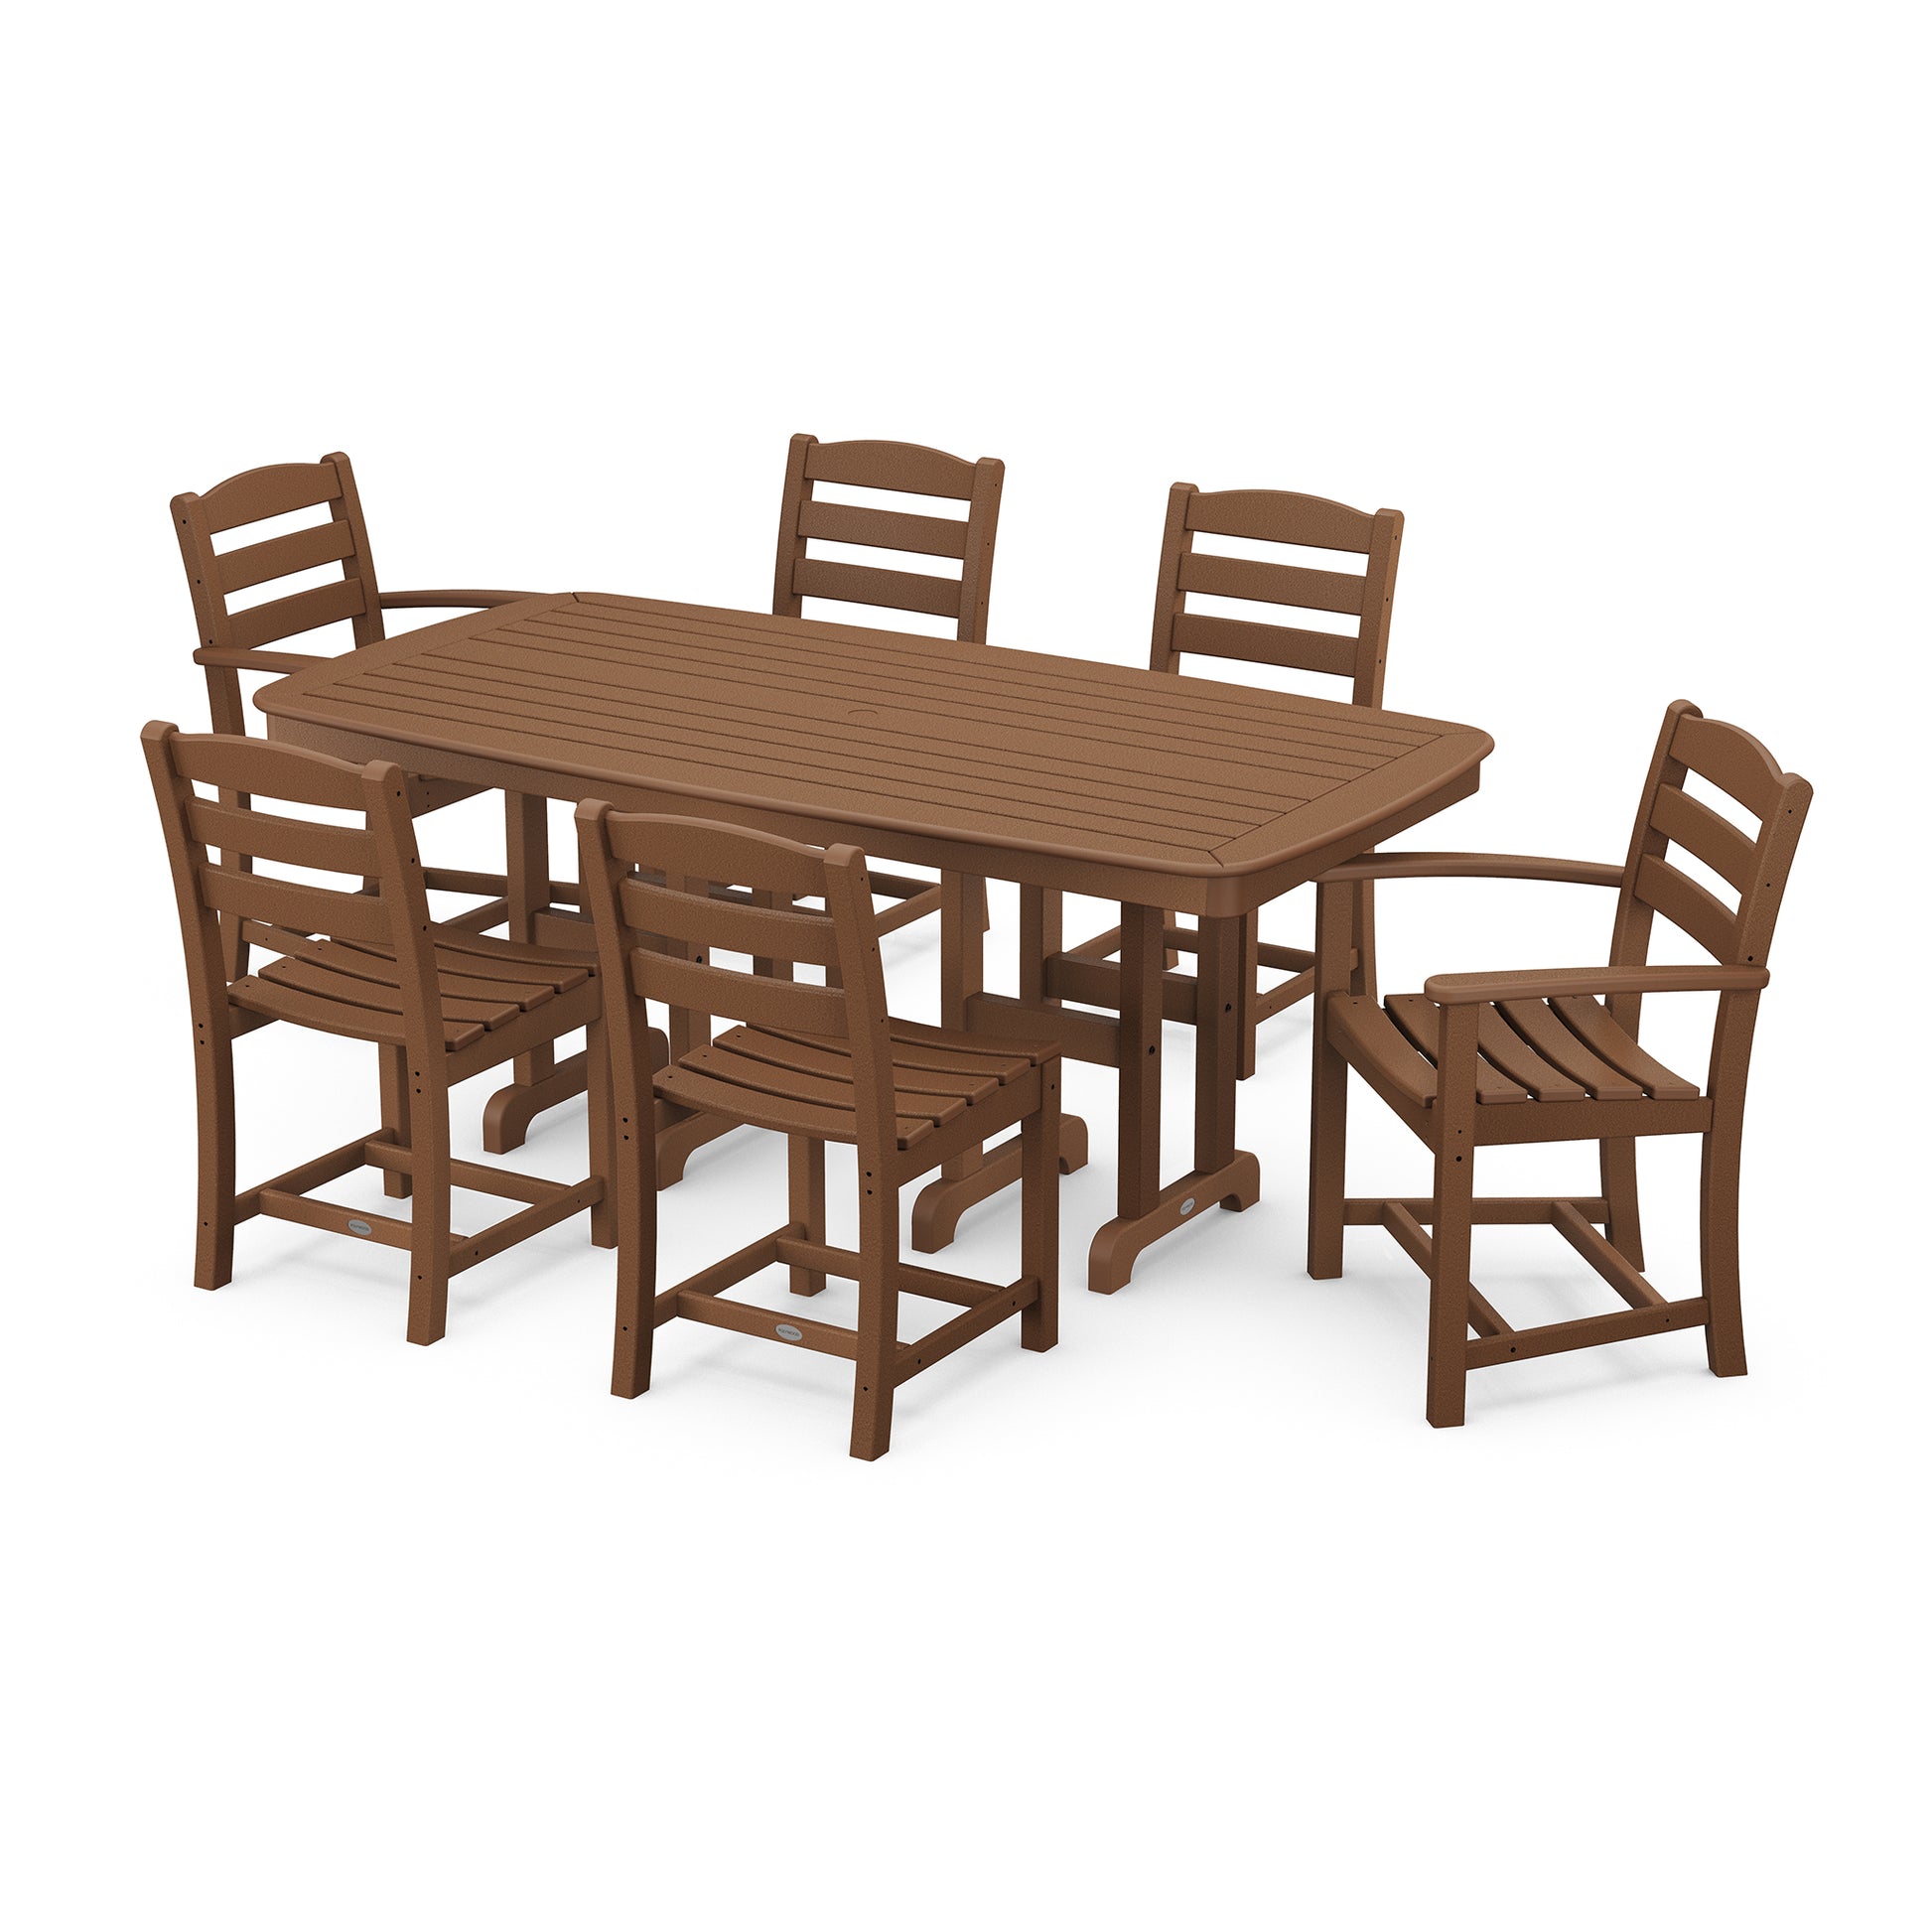 A brown rectangular POLYWOOD® La Casa Cafe 7-Piece Dining Set outdoor dining table with six matching chairs, set against a plain white background. The chairs have vertical slats and armrests.